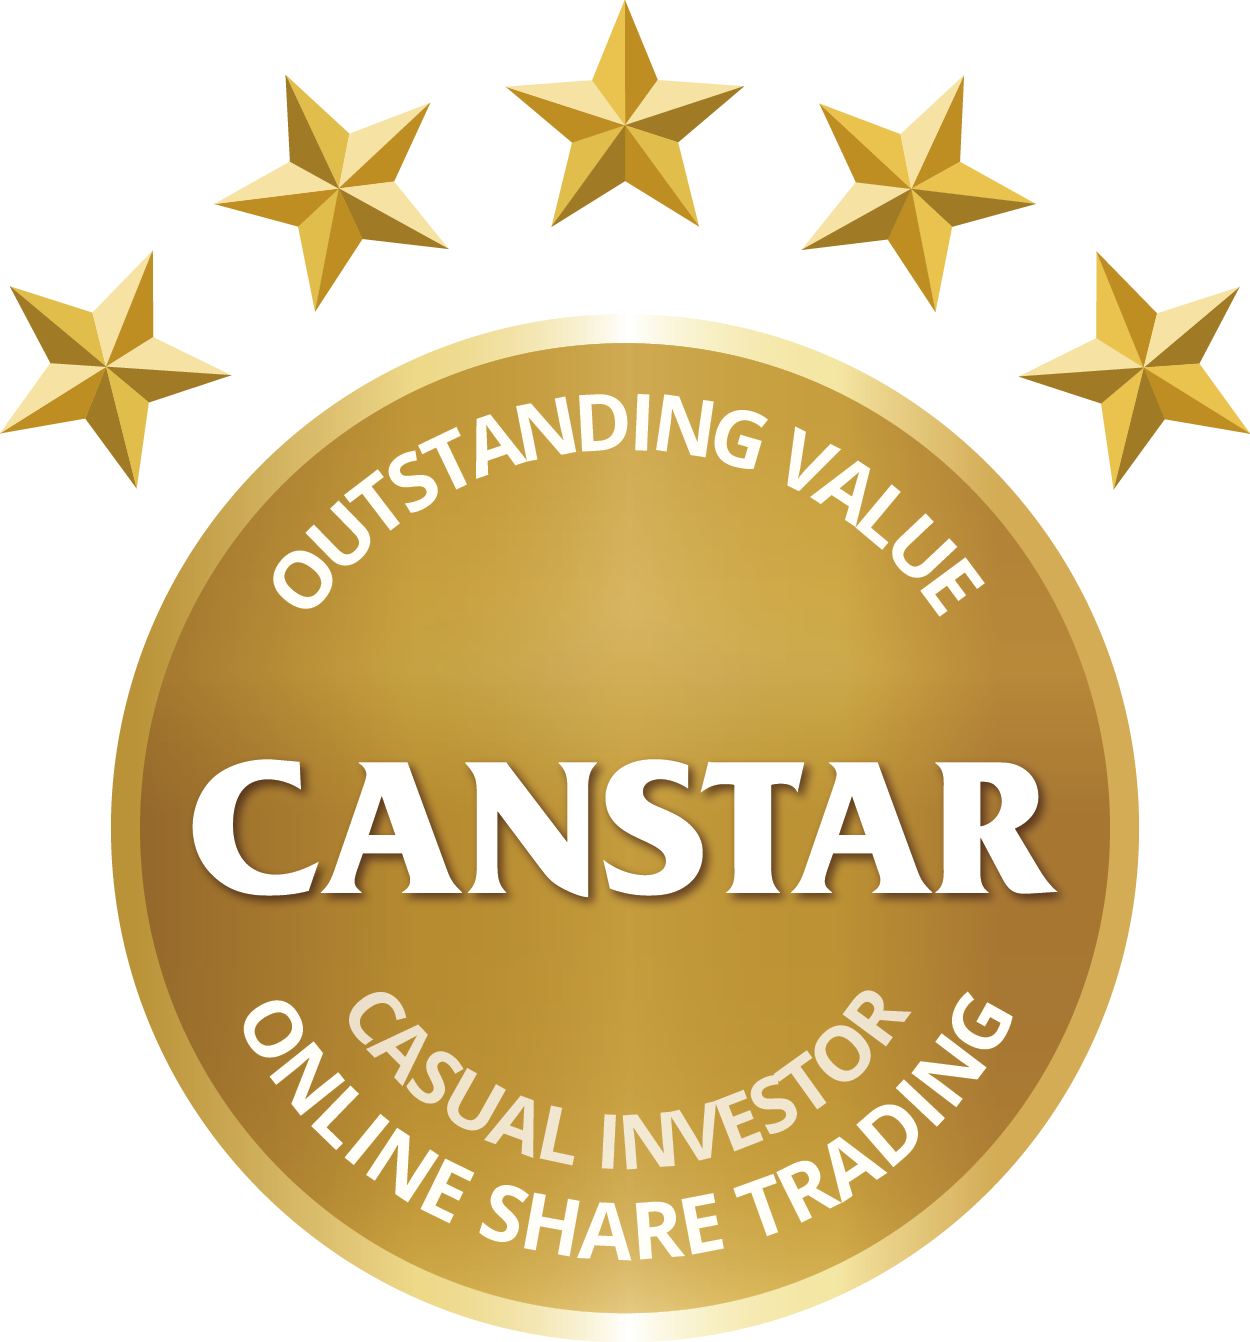 Categoria "Outstanding Value for Casual Investors" Canstar